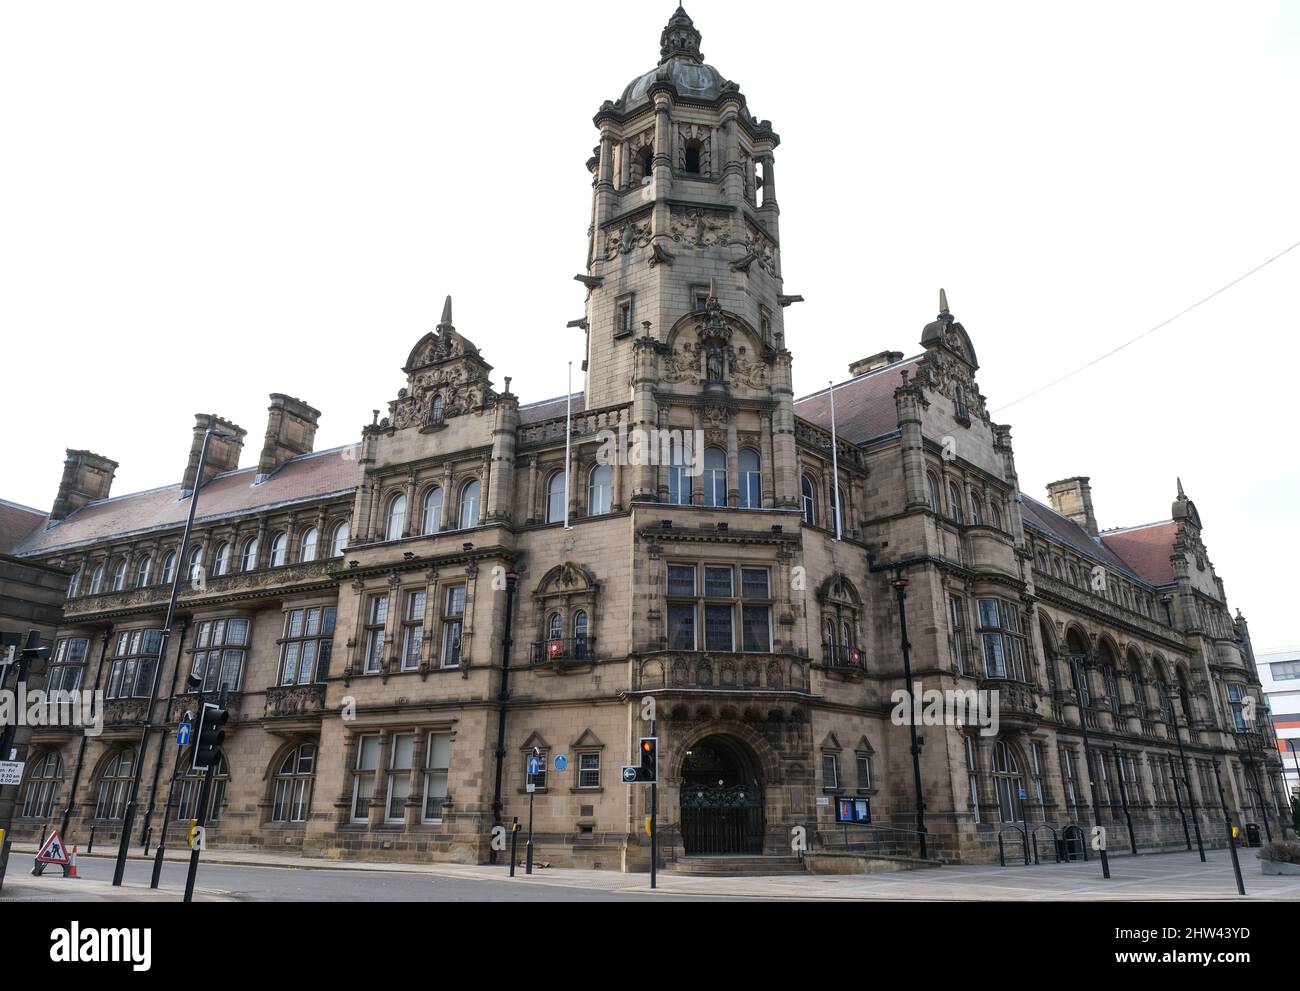 One of Wakefield's elegant civic buildings which hint at the town's former importance as a commercial centre. Stock Photo